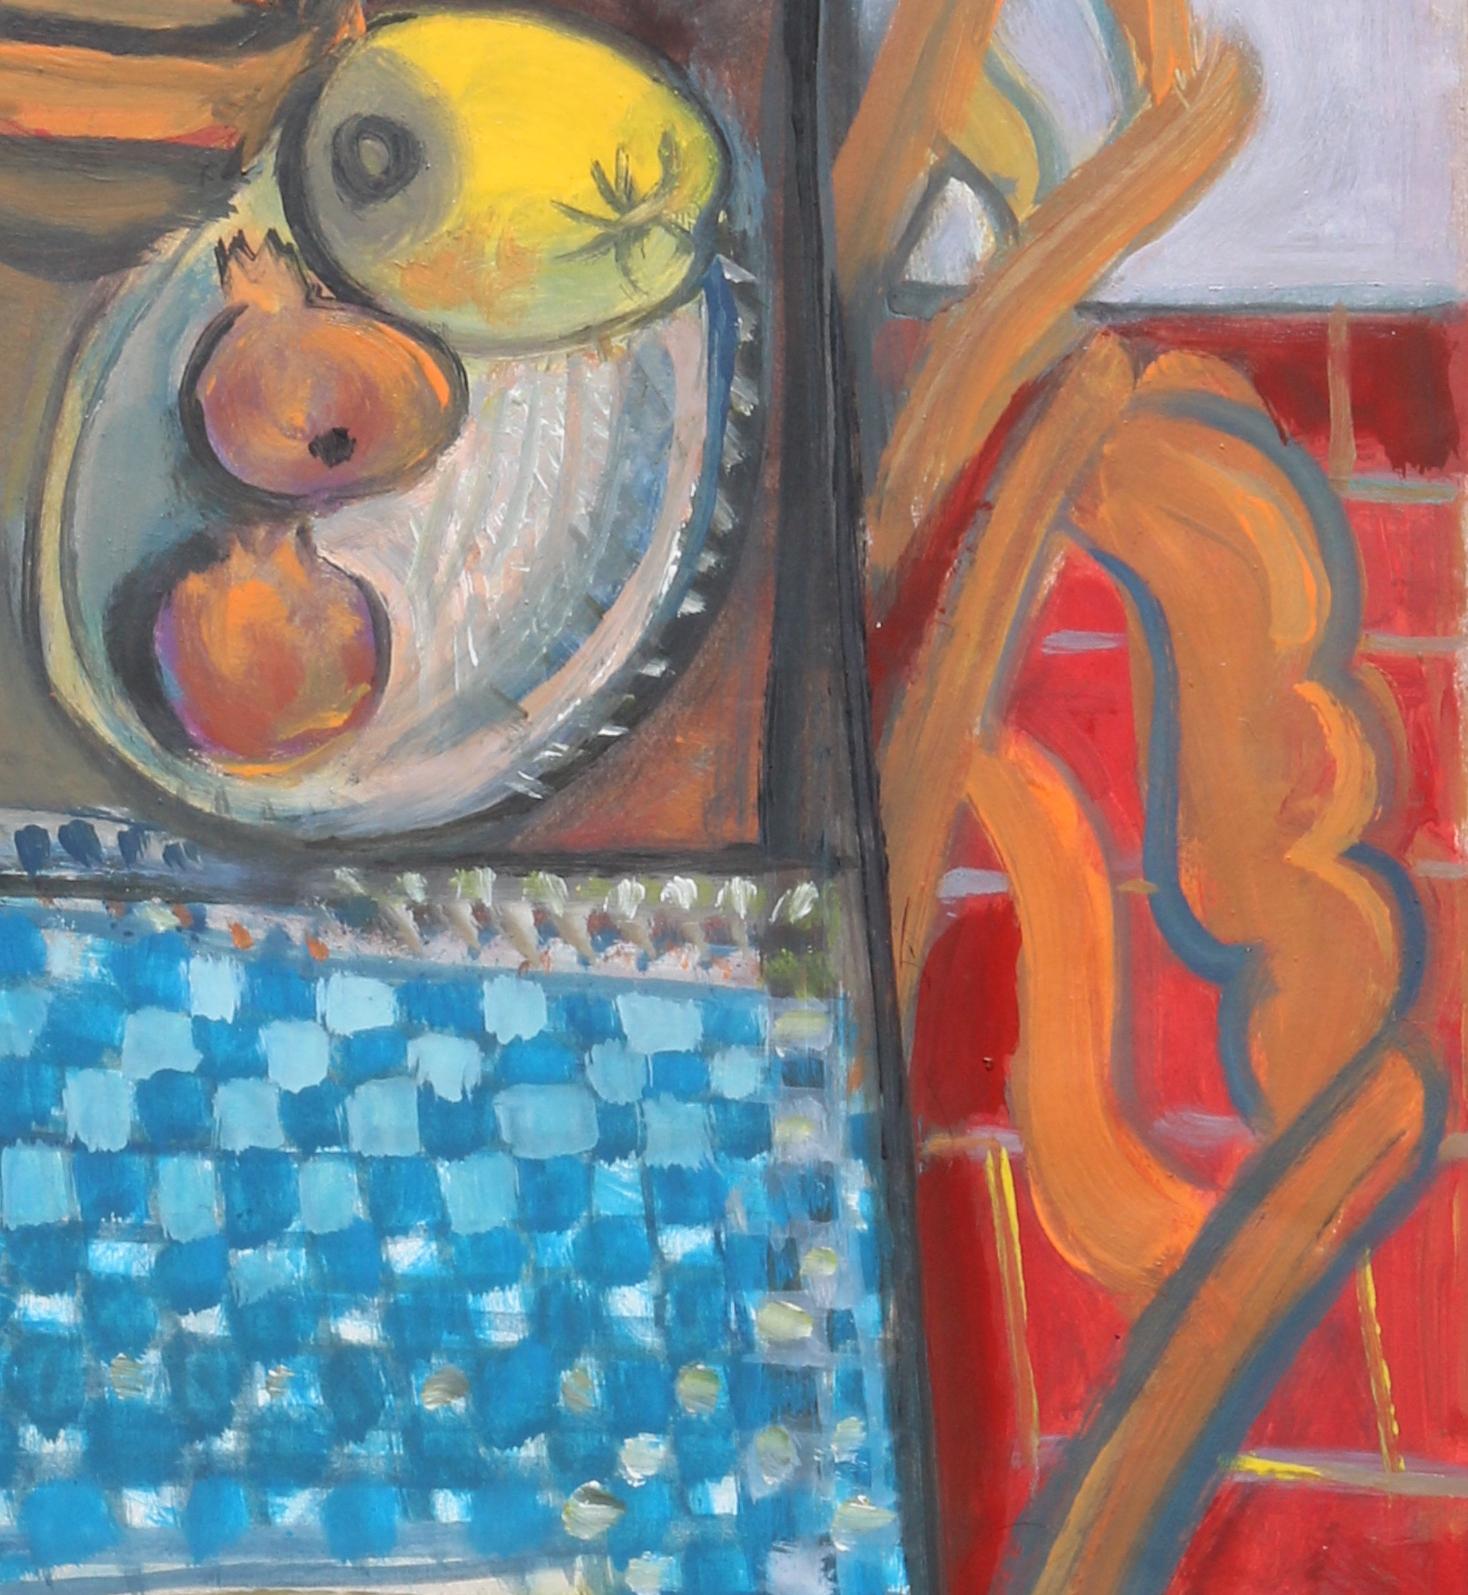 Fruits and books on a plaid tablecloth, unique piece, oil paint on paper, 1989 2